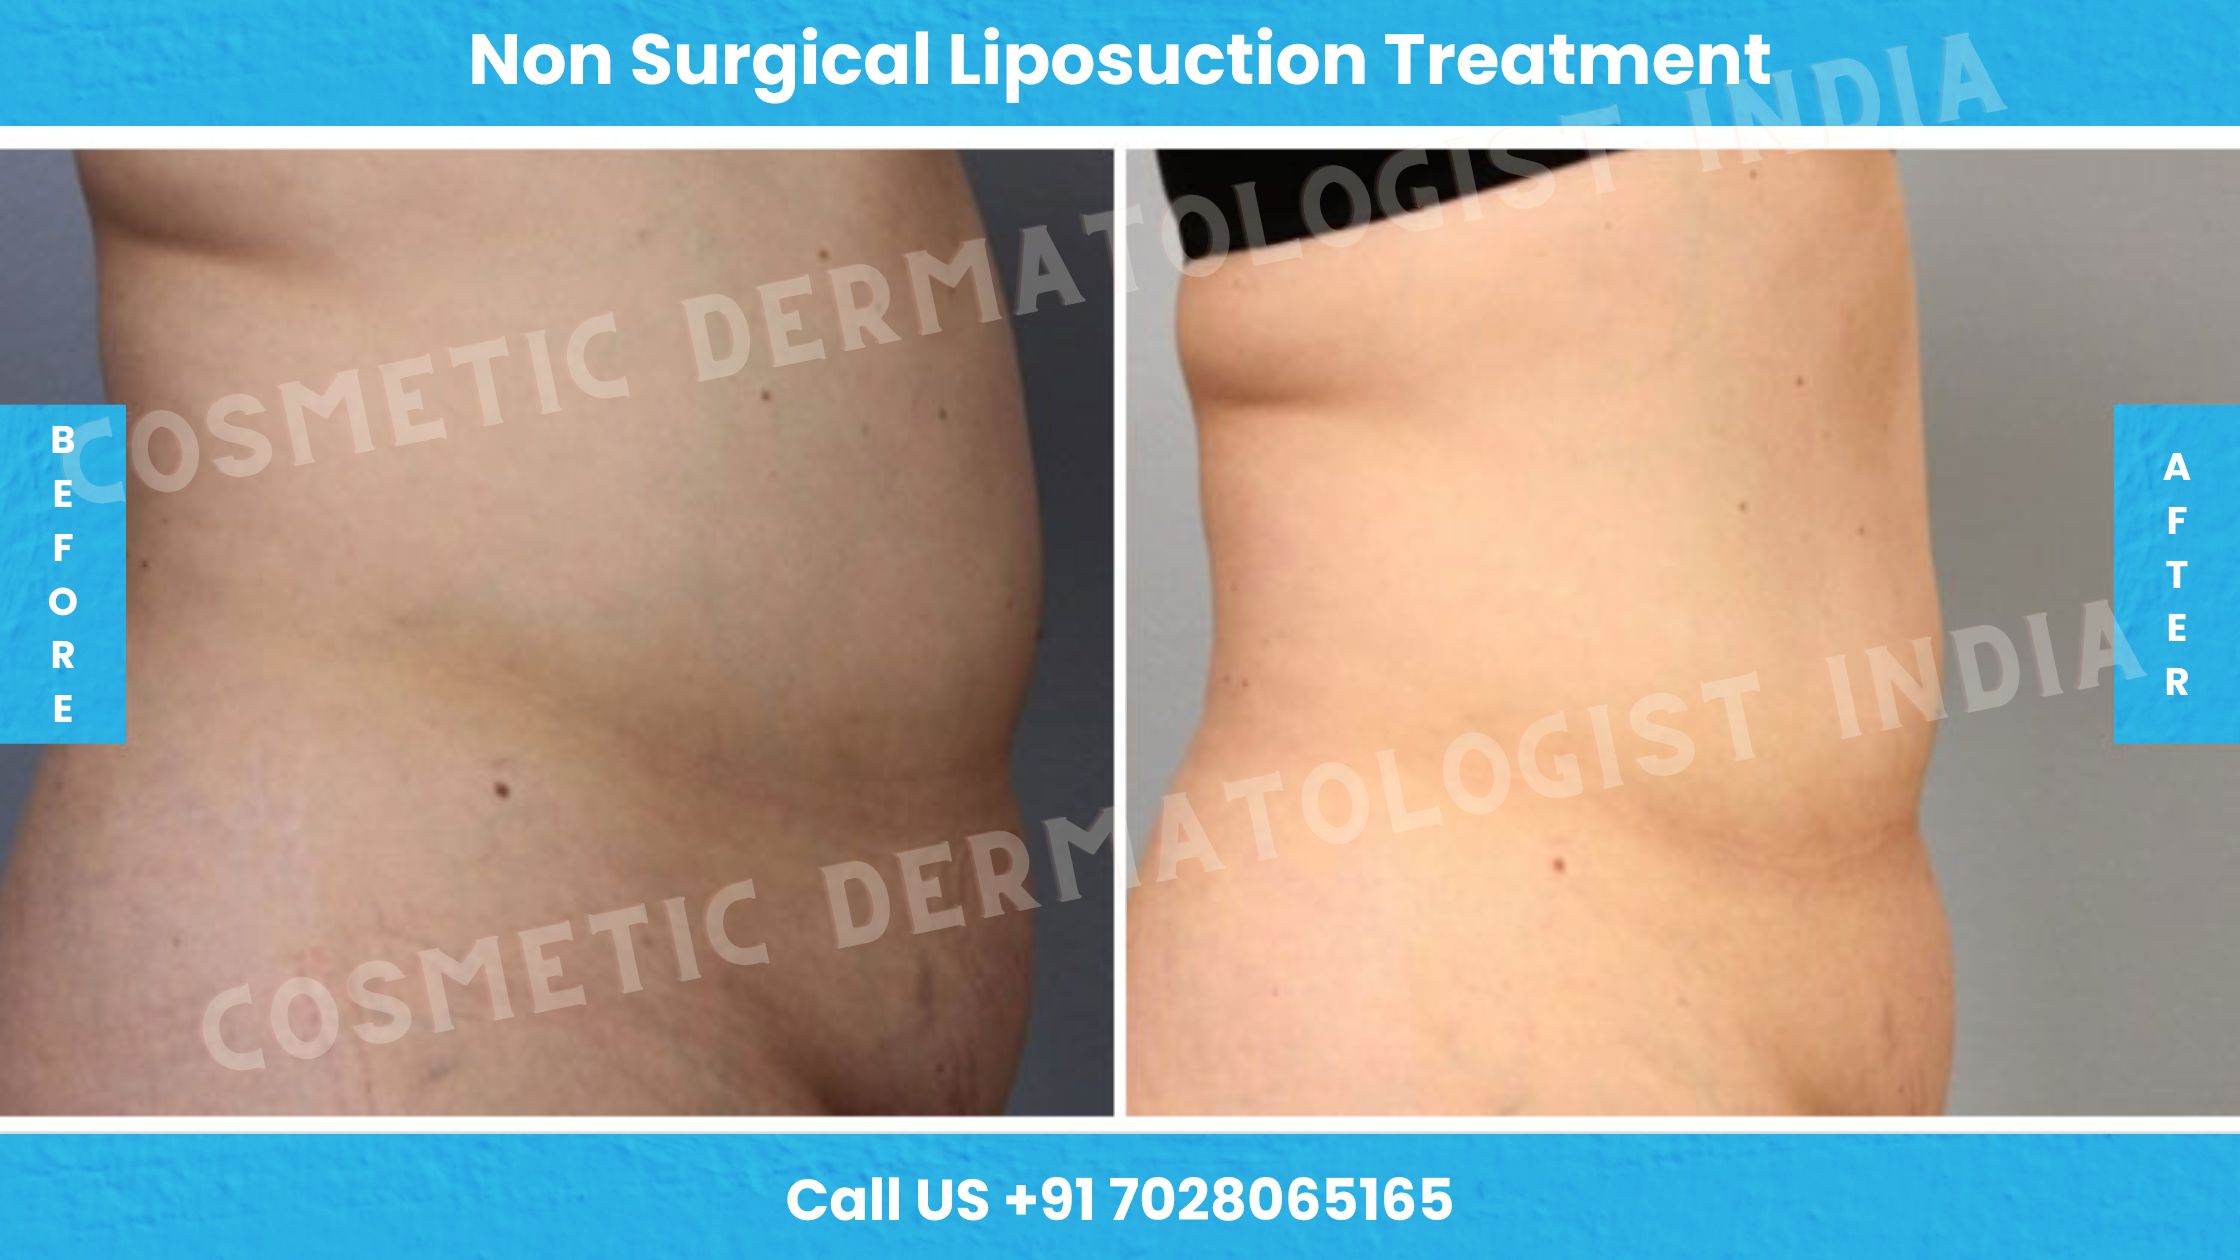 Non-Surgical Laser Liposuction Treatment Cost in Mumbai, India